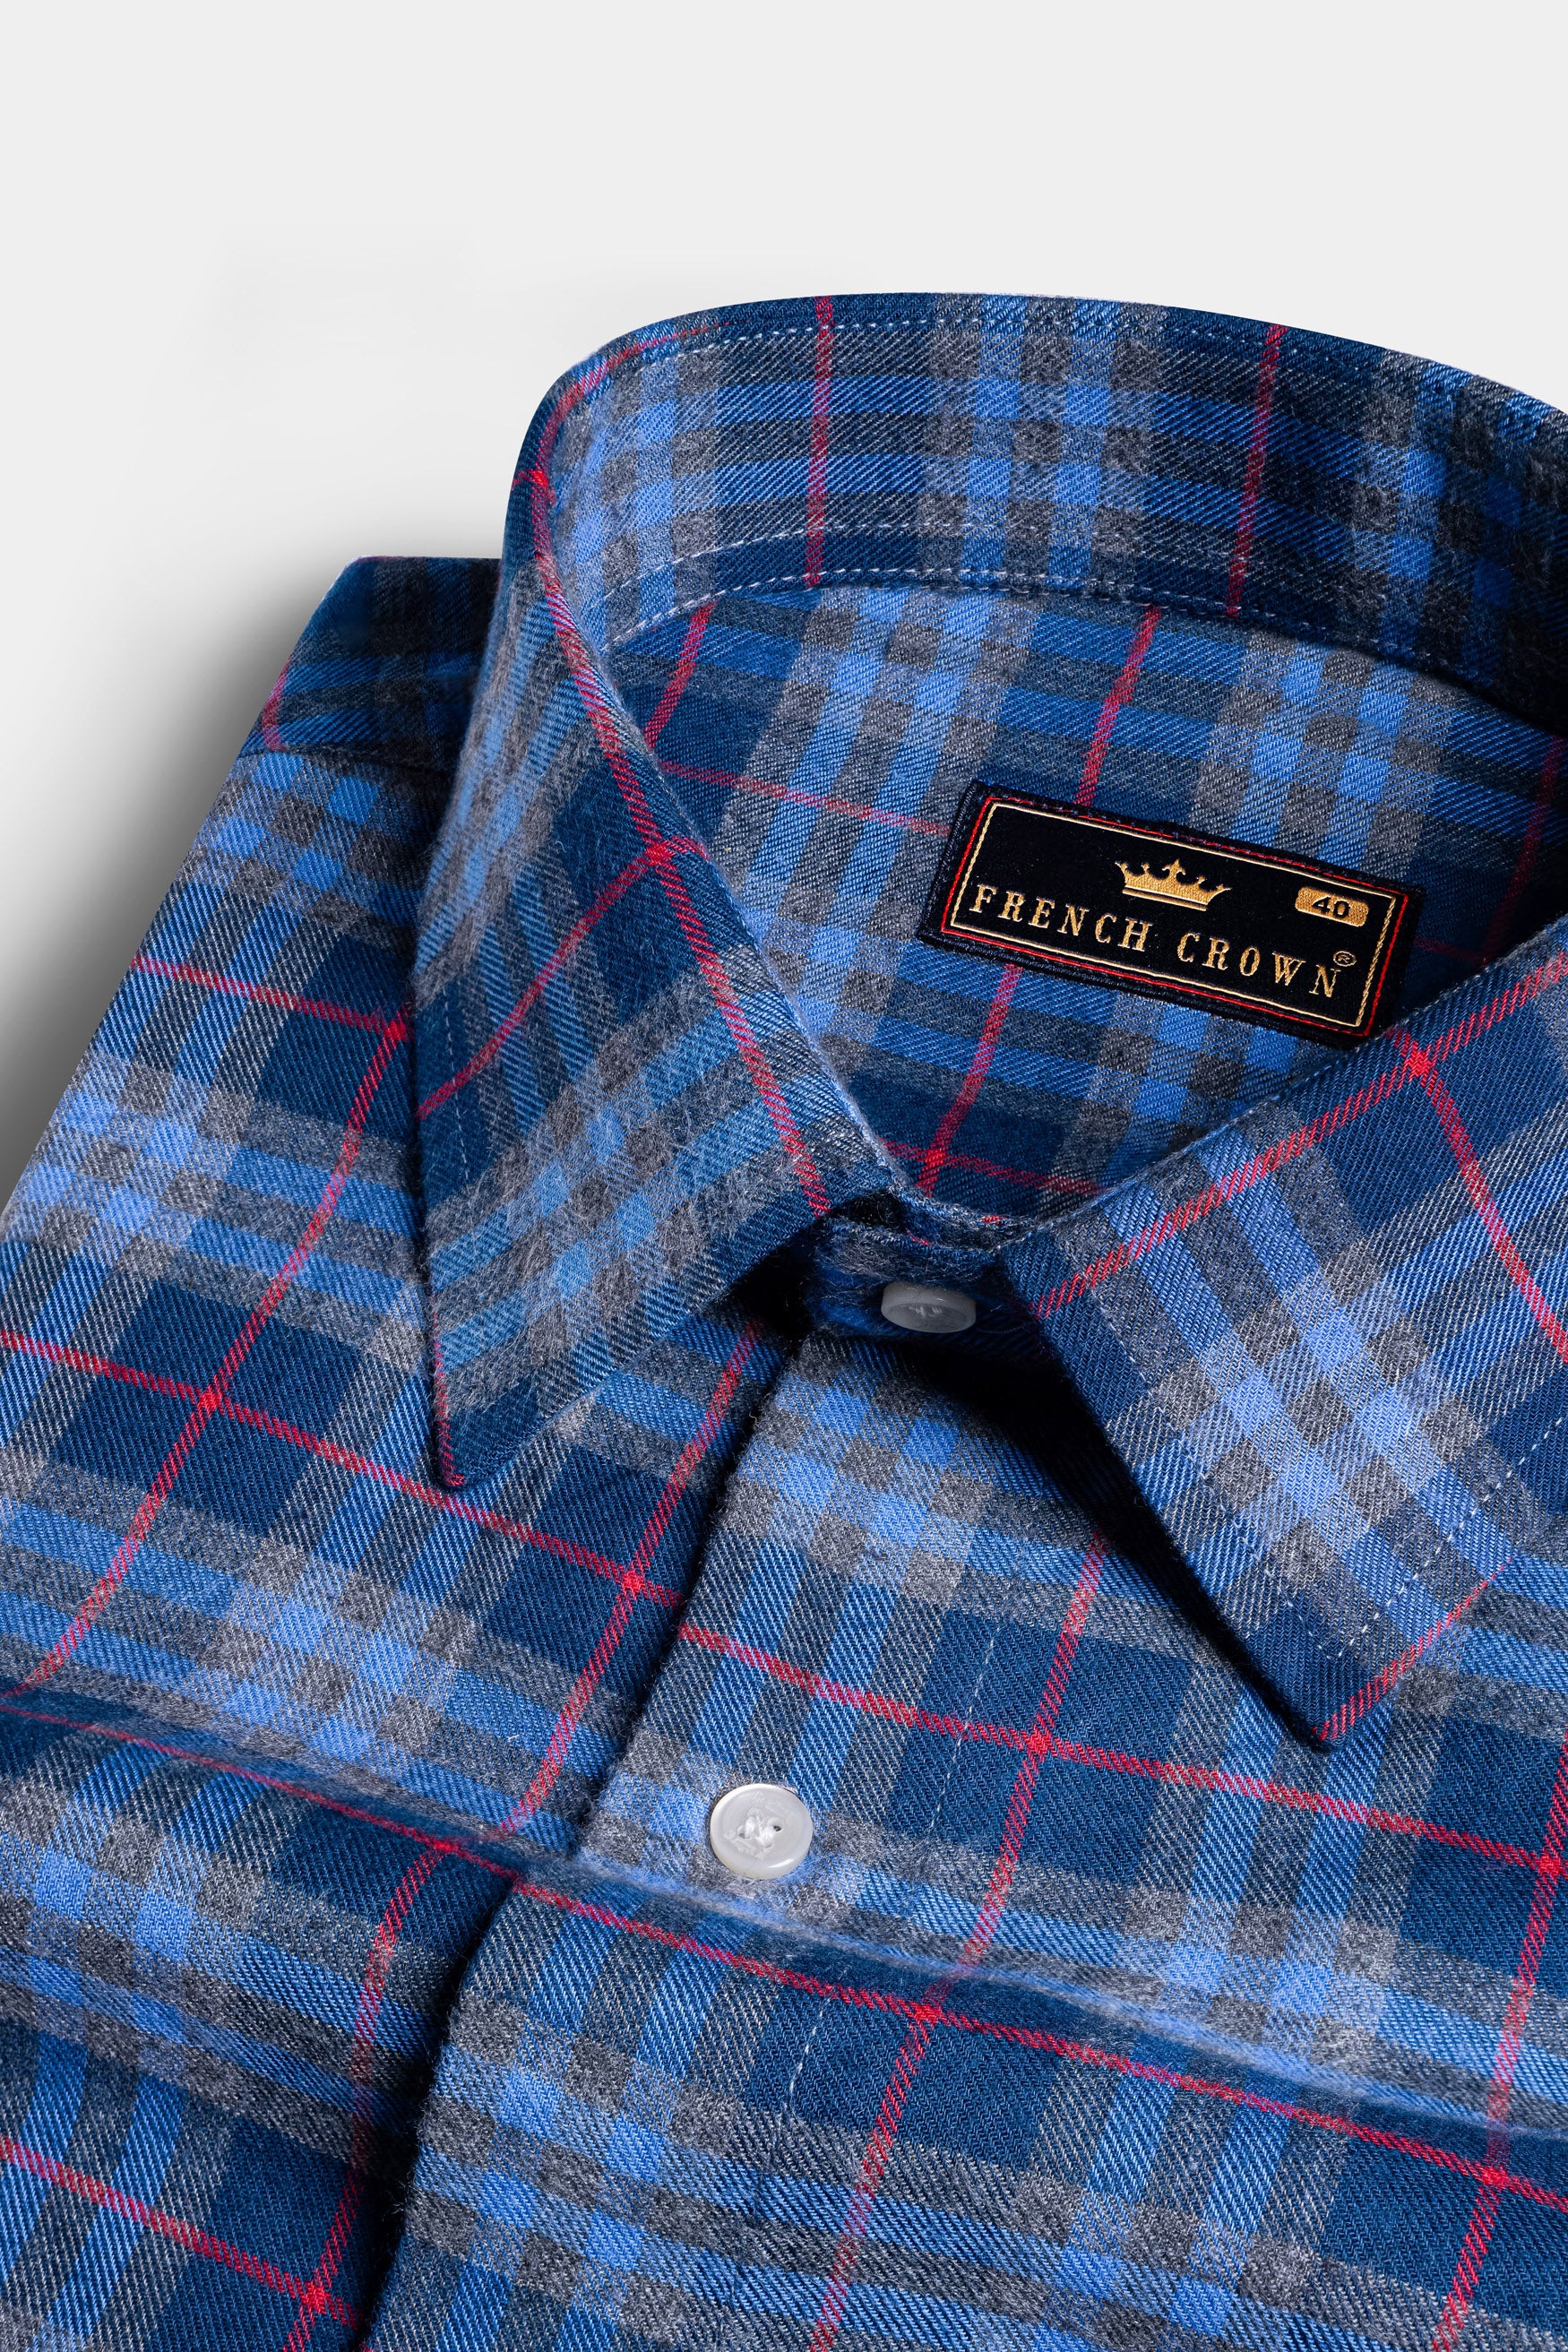 Midnight Blue and Shiraz Red Twill Plaid with Funky Patchwork Premium Cotton Designer Shirt